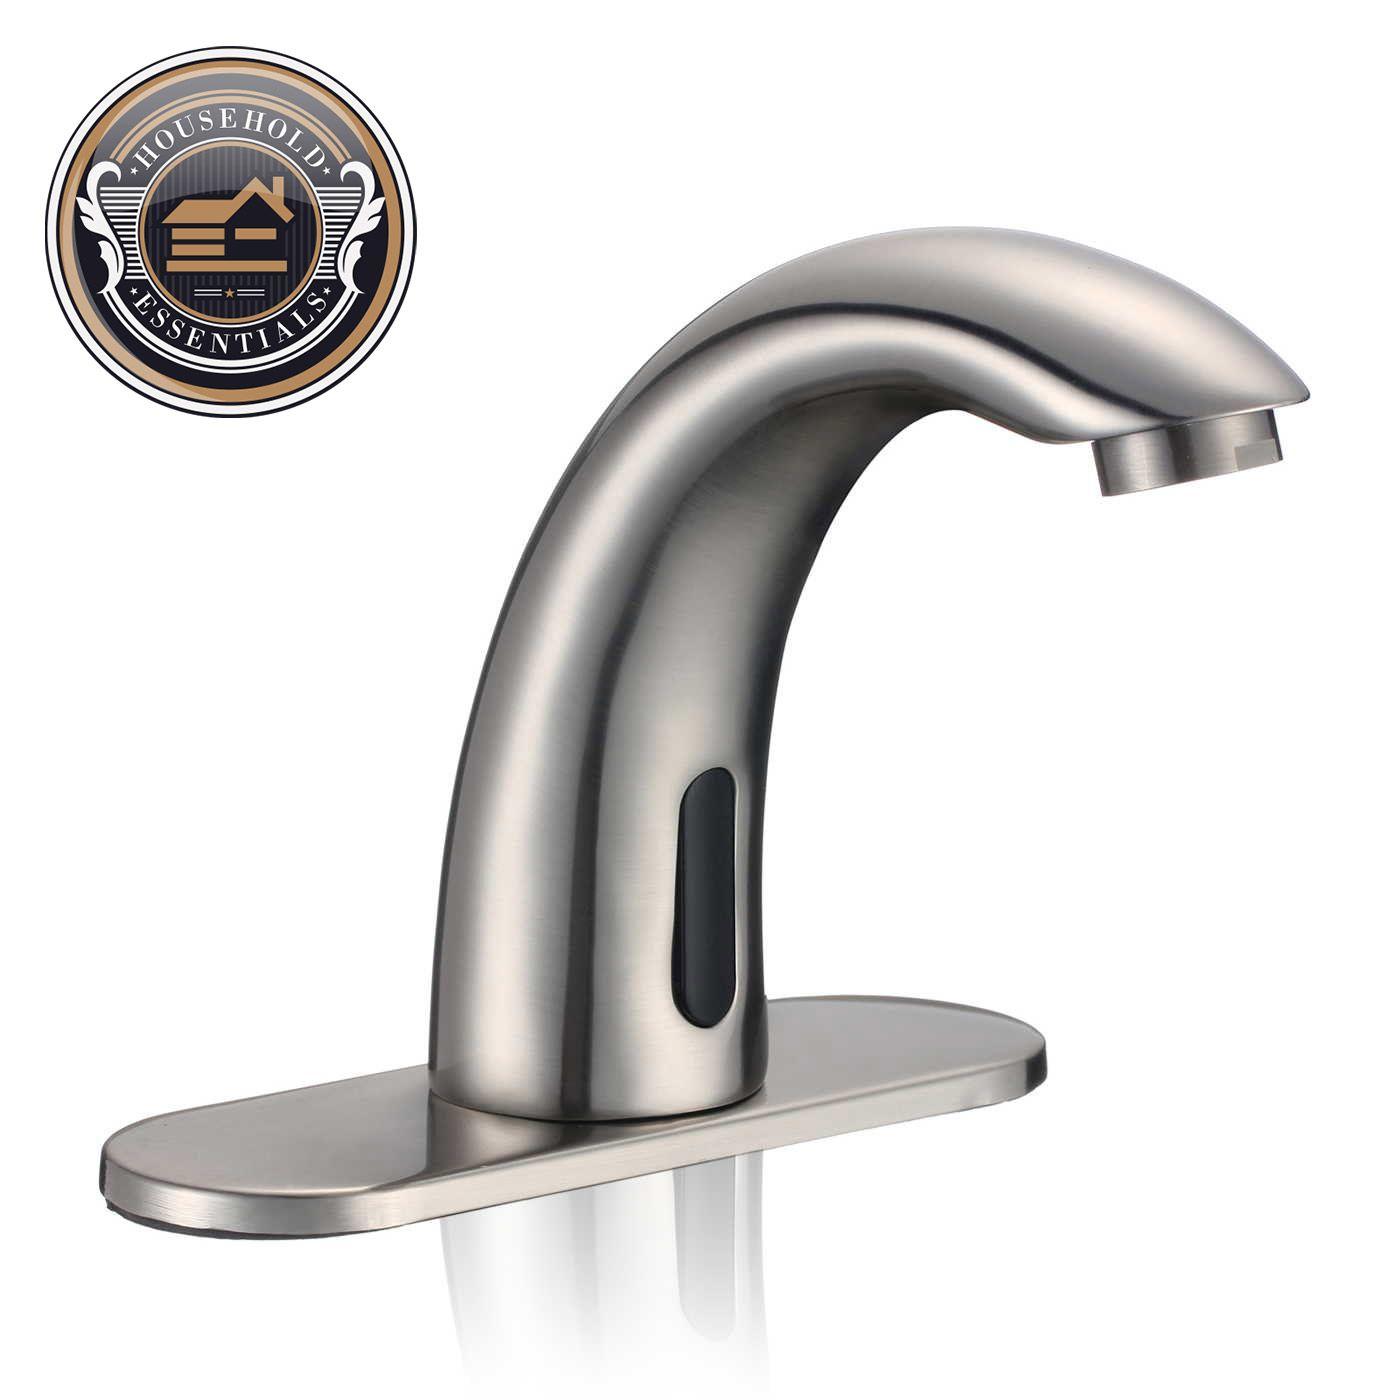 Bathroom Sink Logo - Touchless Bathroom Sink Faucet Hands Free Tap